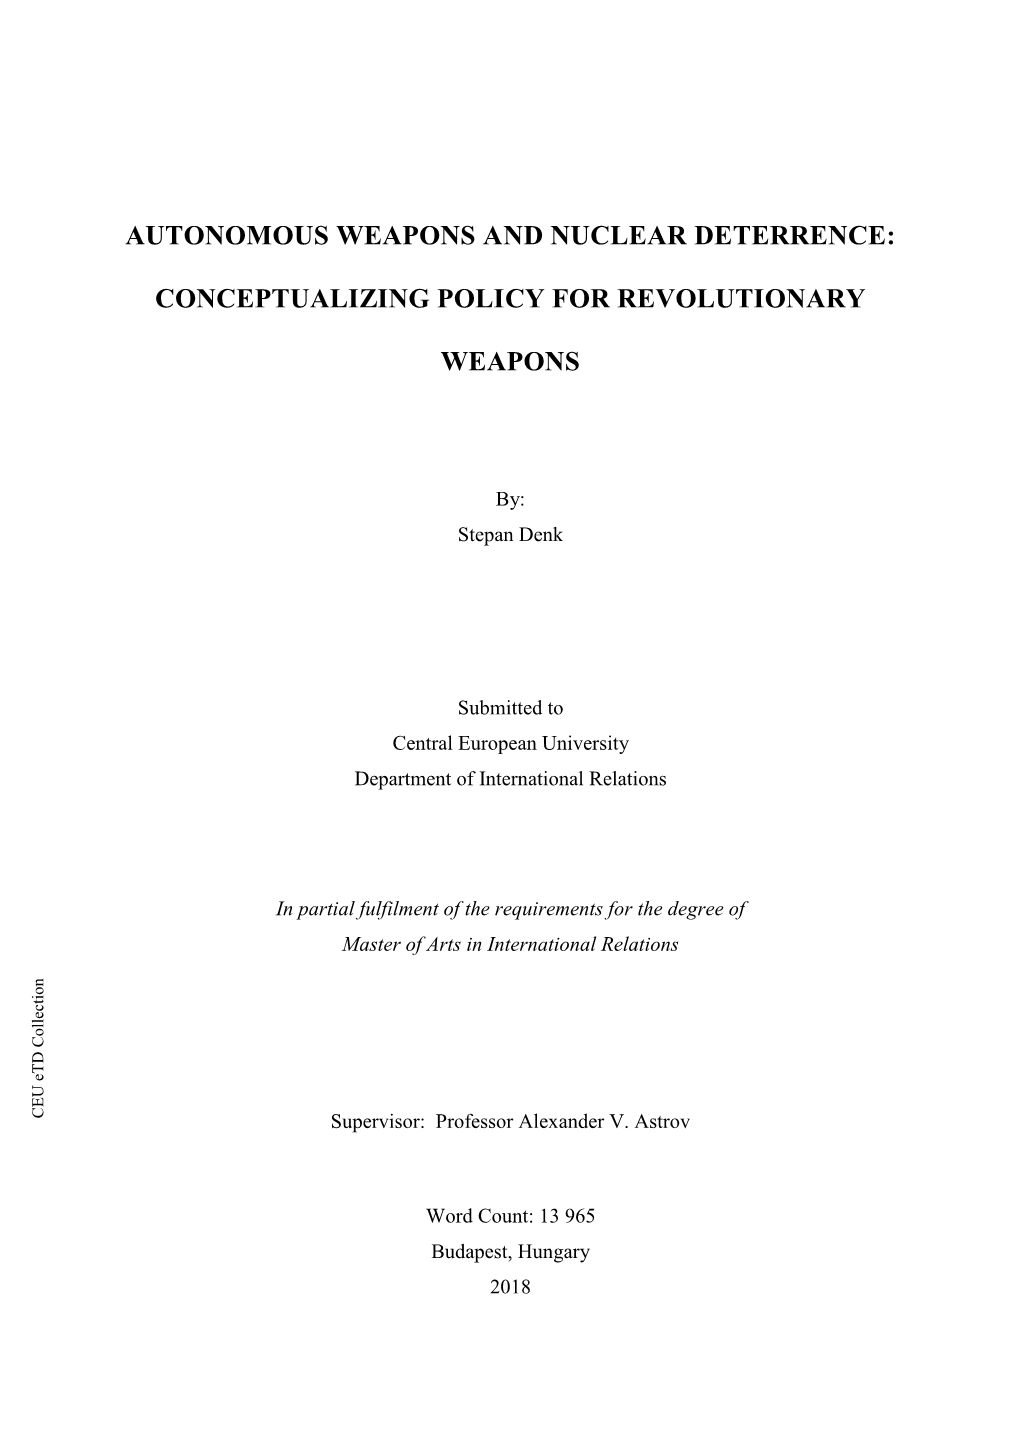 Autonomous Weapons and Nuclear Deterrence: Conceptualizing Policy for Revolutionary Weapons